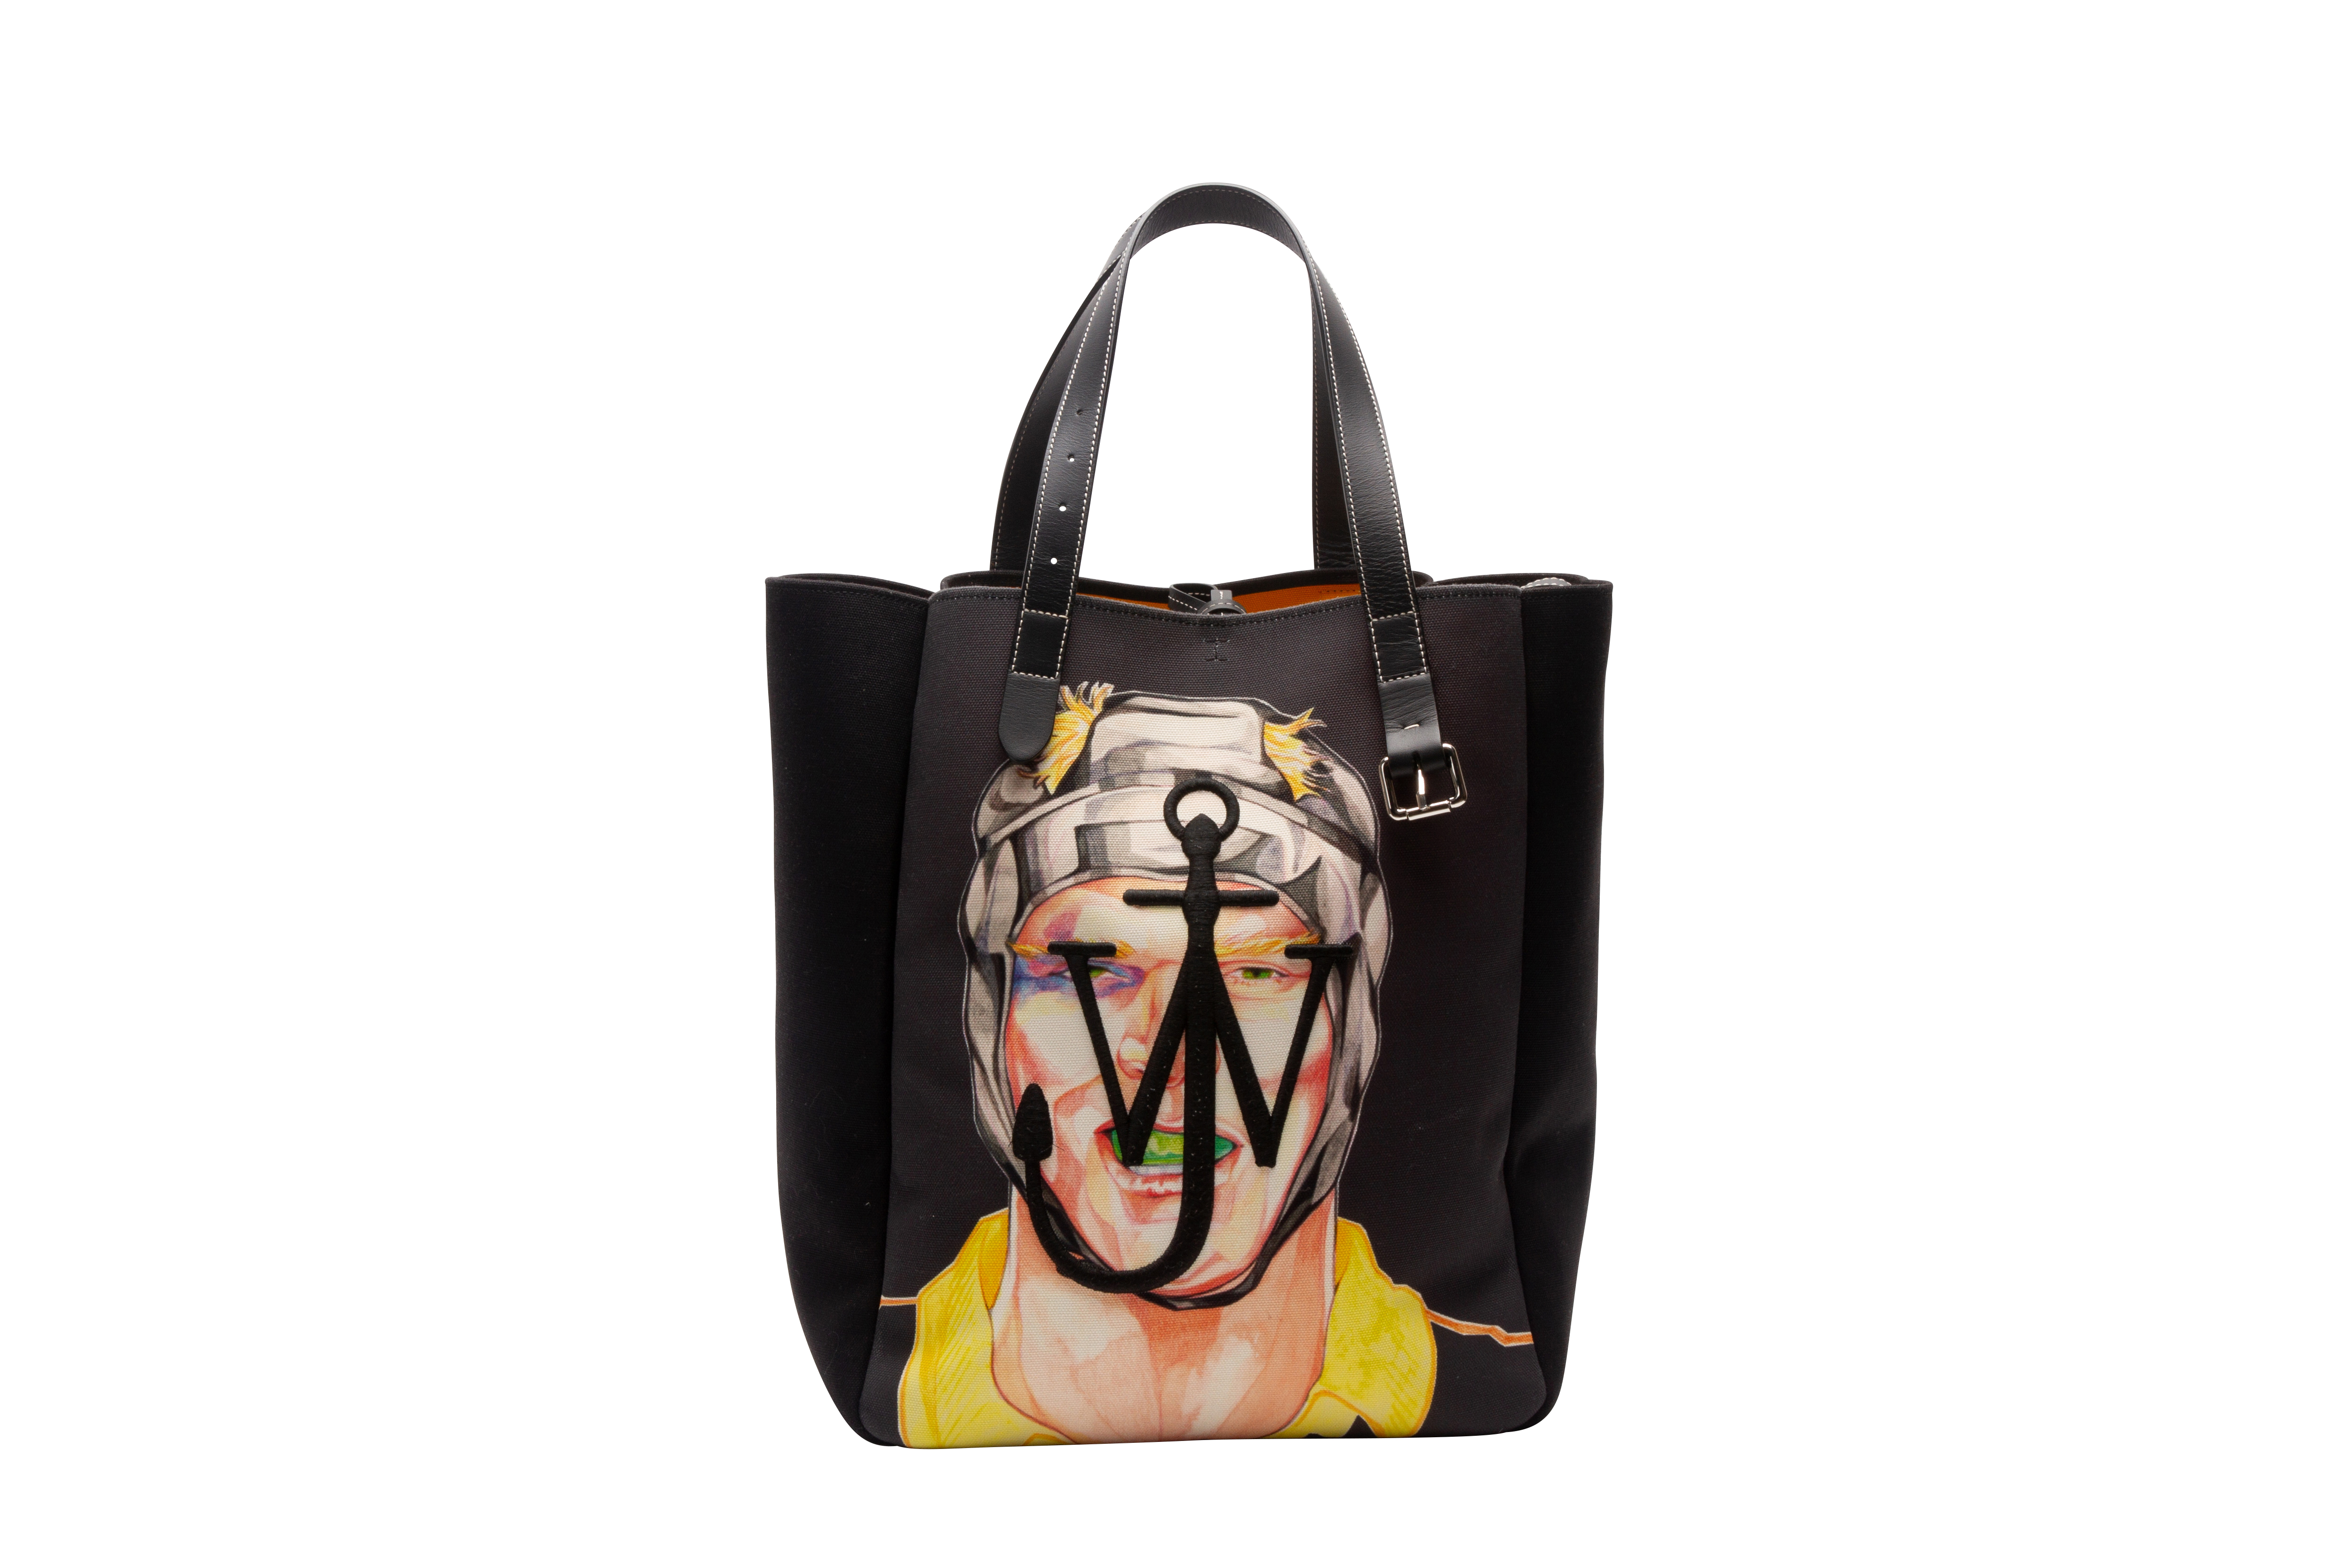 A JW ANDERSON RUGBY TOTE BAG - Image 2 of 6